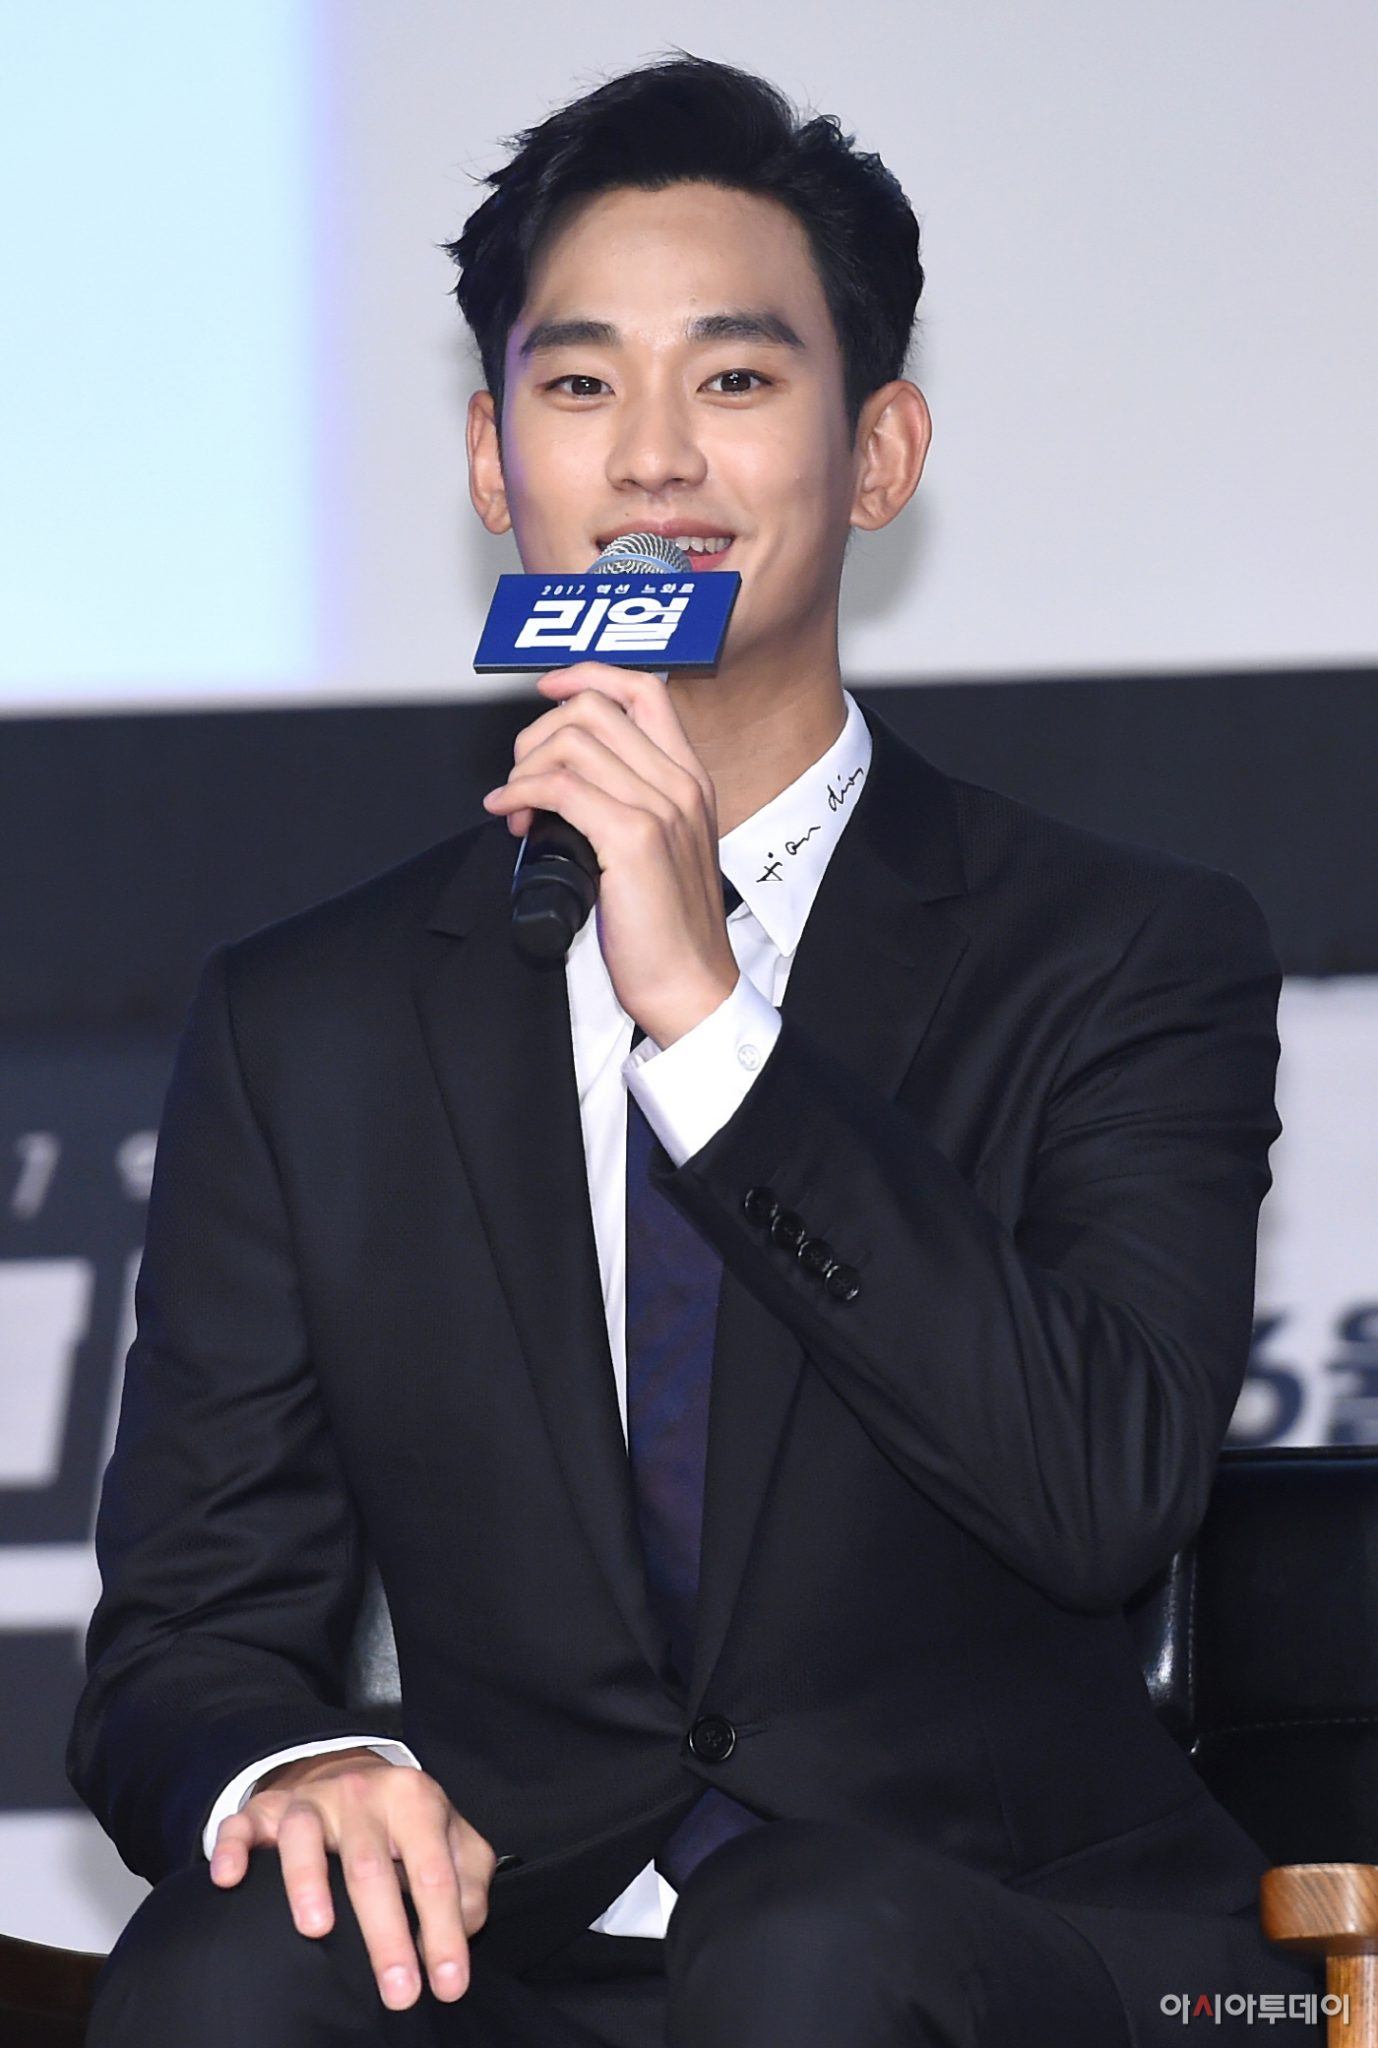 Kim Soo Hyun Shares How He Filmed His Bed Scene With Sulli